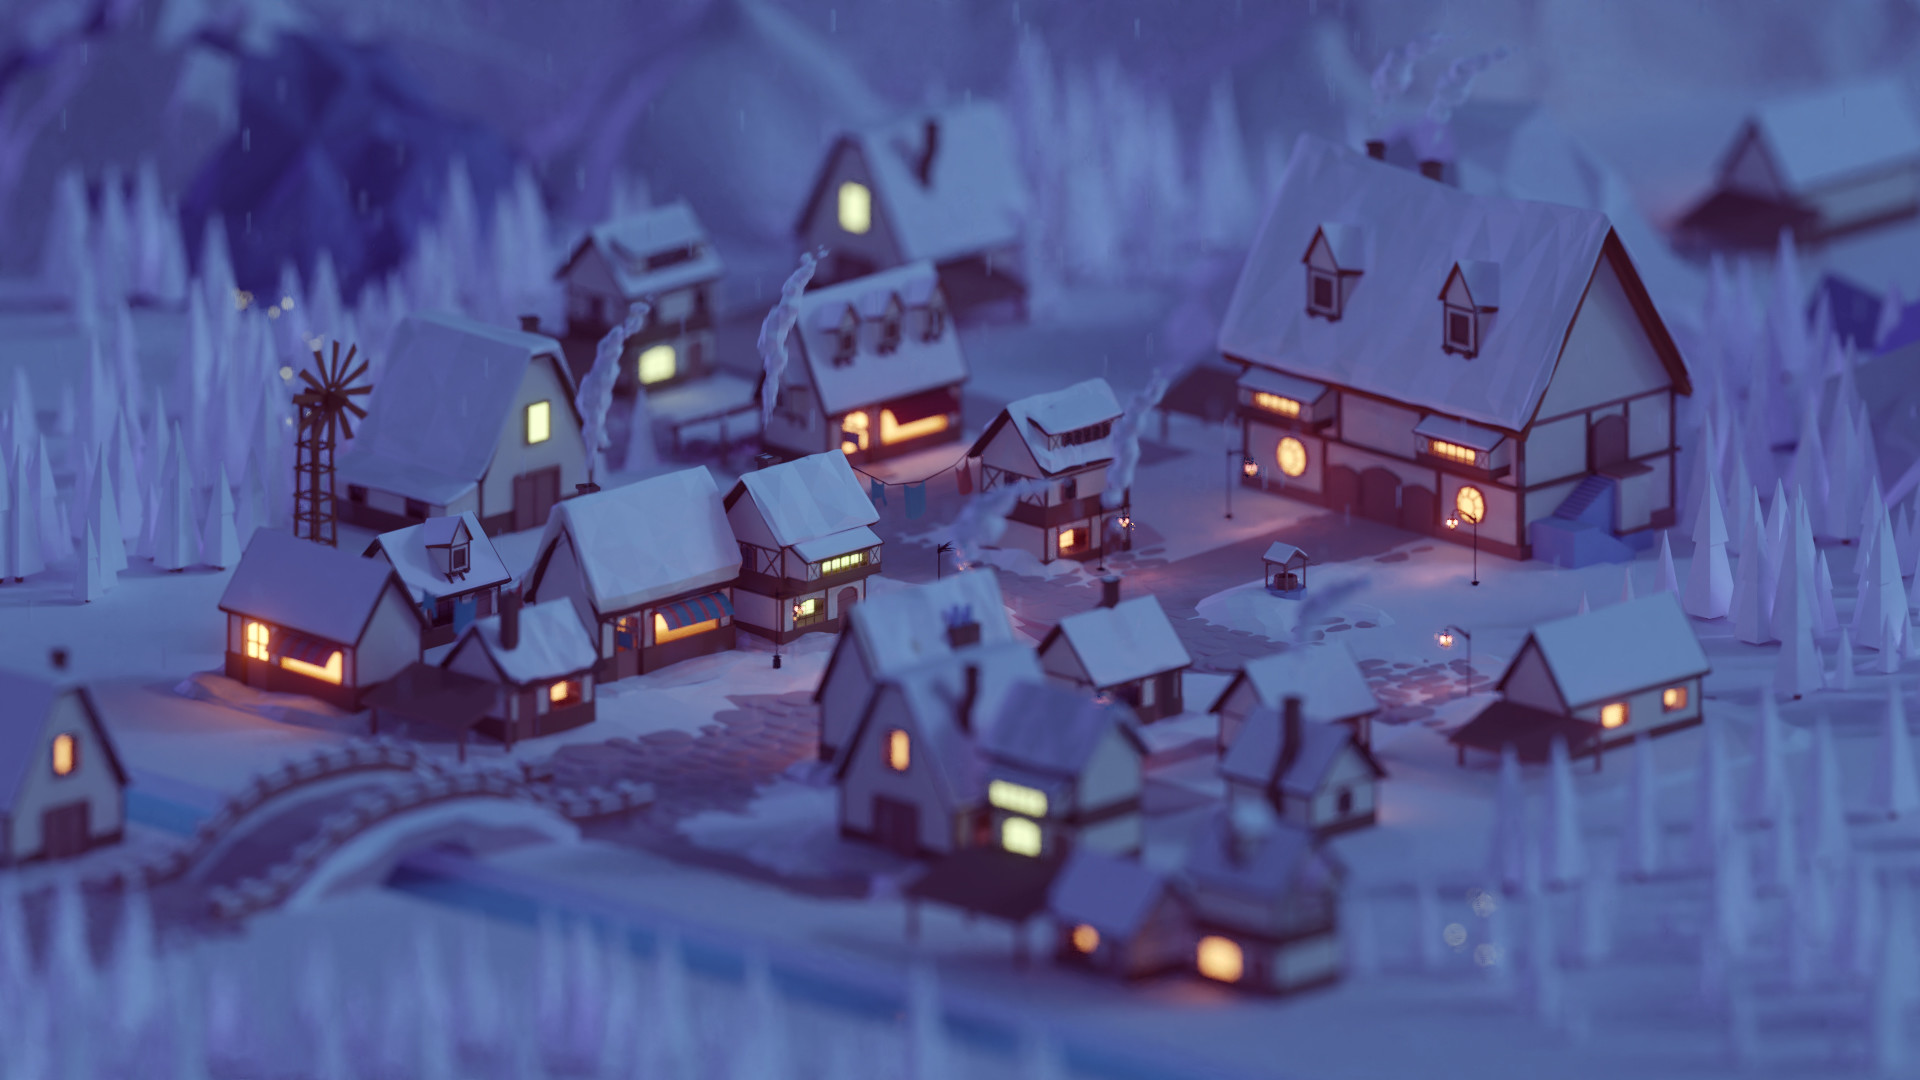 General 1920x1080 Mohamed Chahin render geometry nature forest trees street city night winter house macro low poly